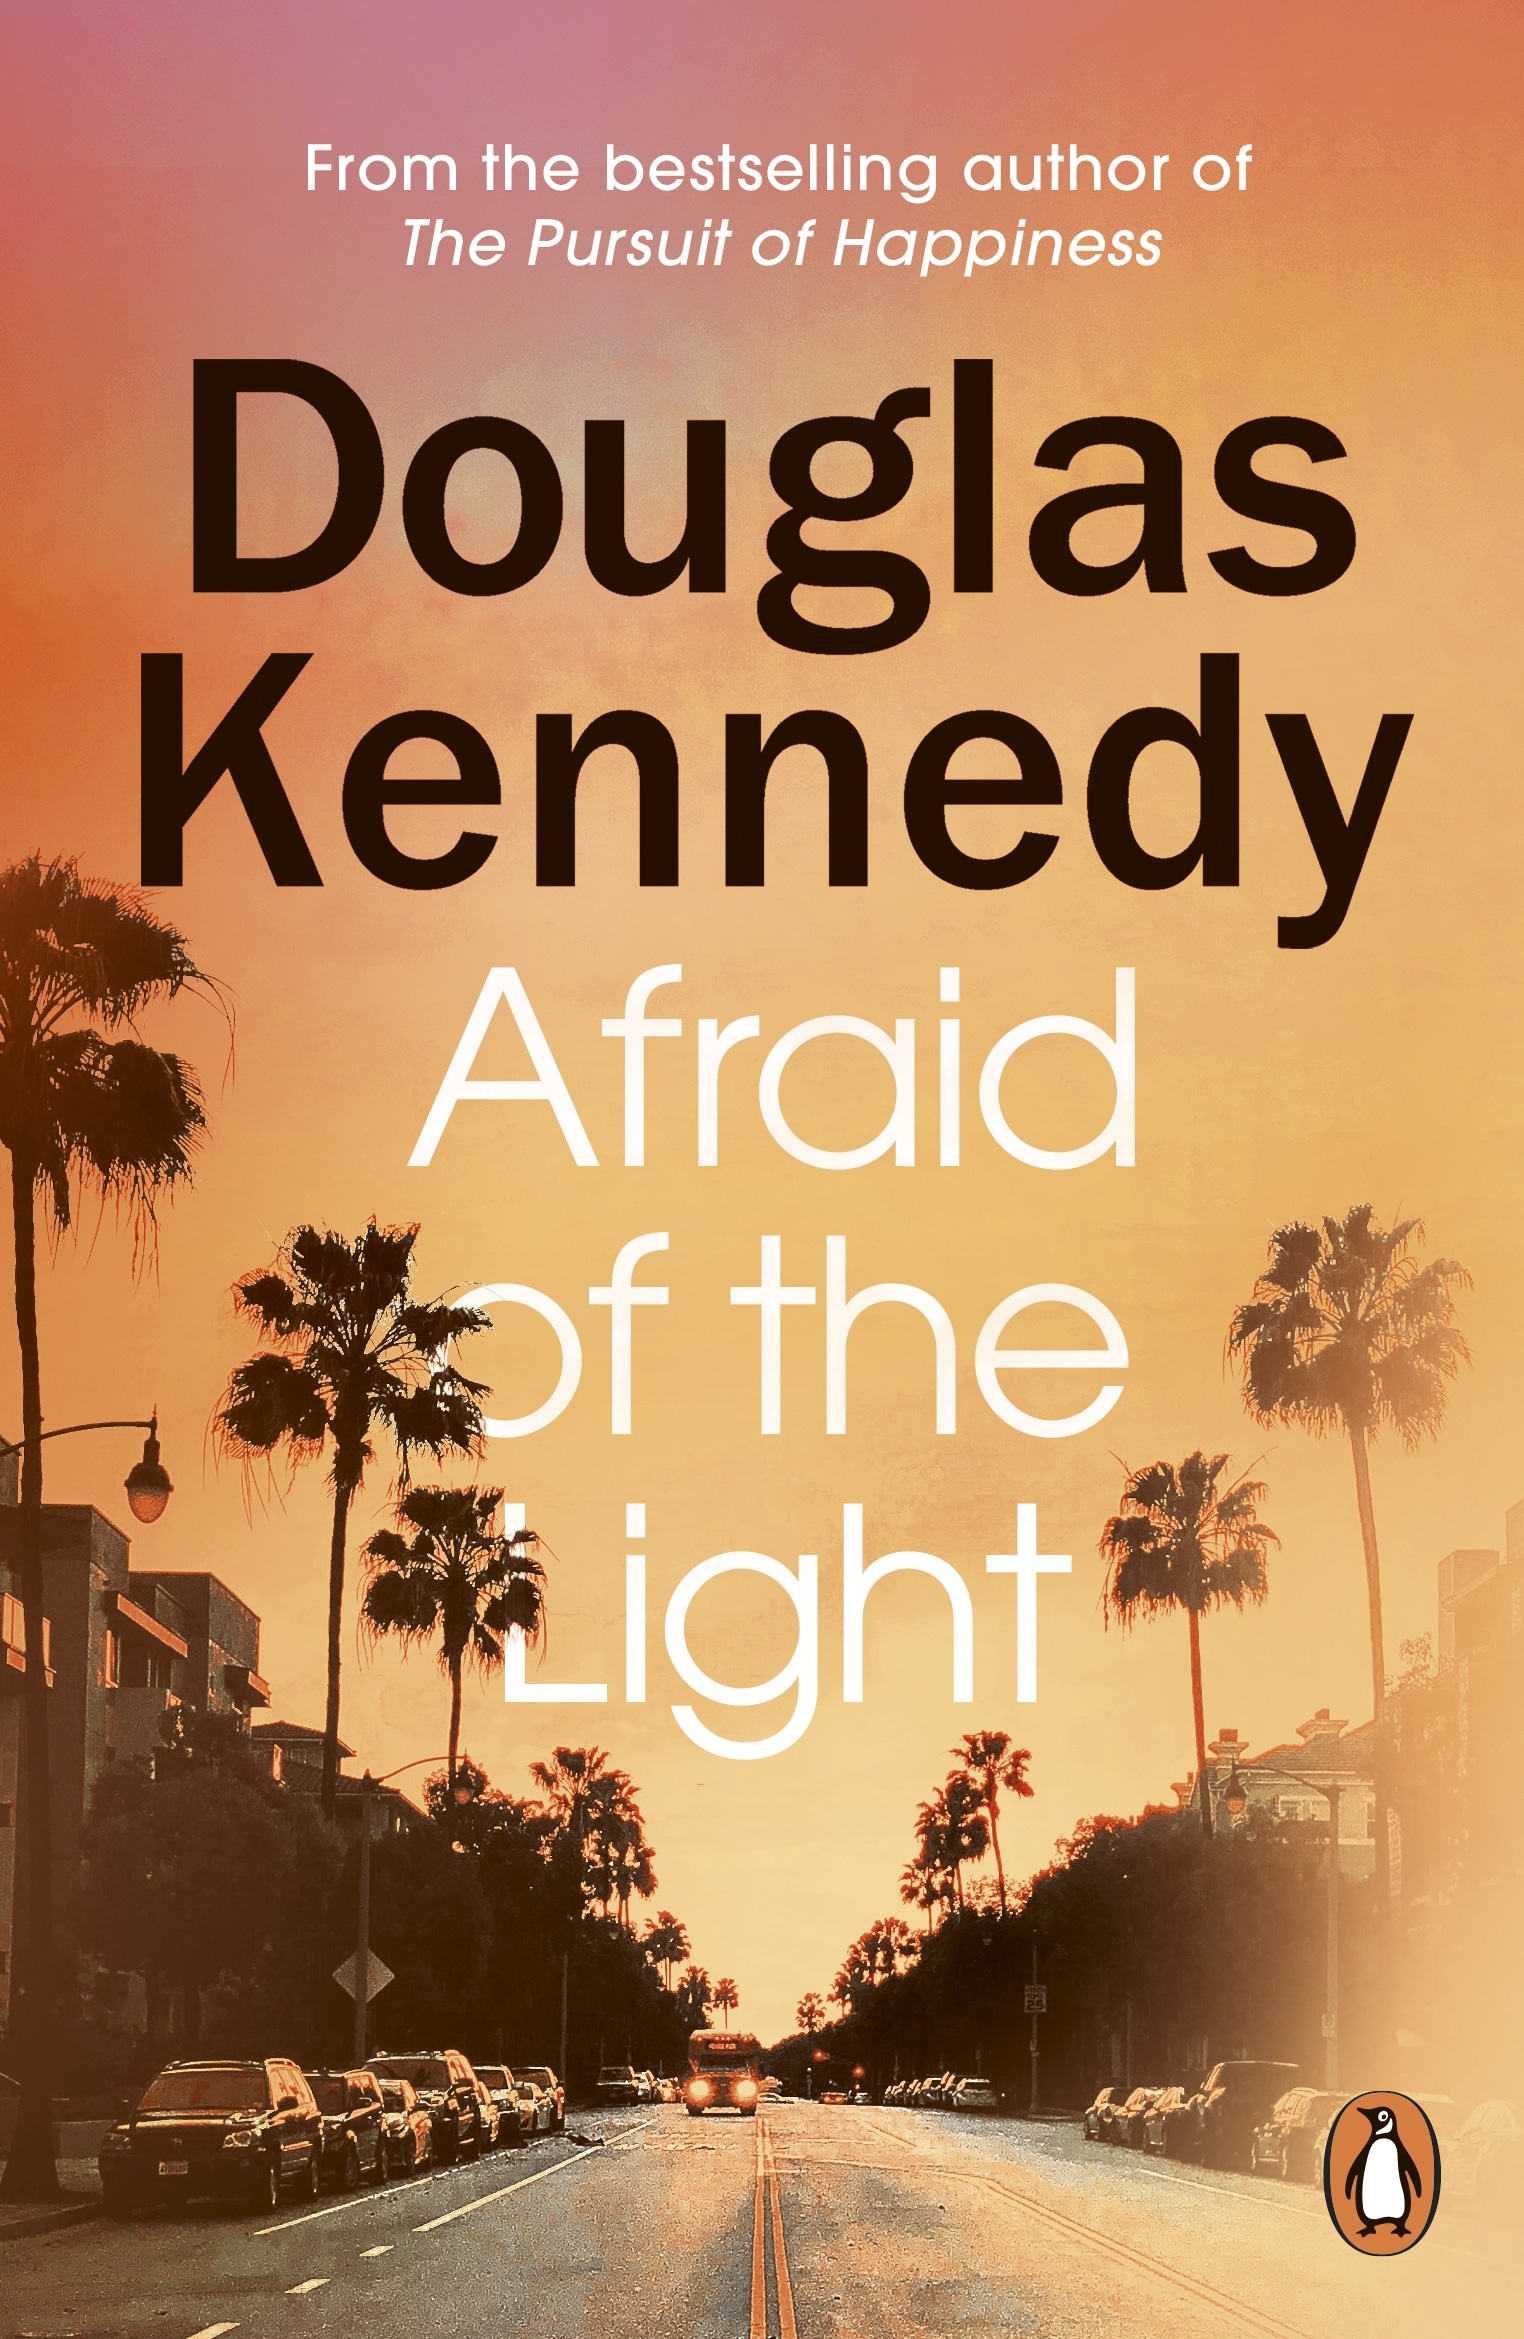 Book “Afraid of the Light” by Douglas Kennedy — April 7, 2022